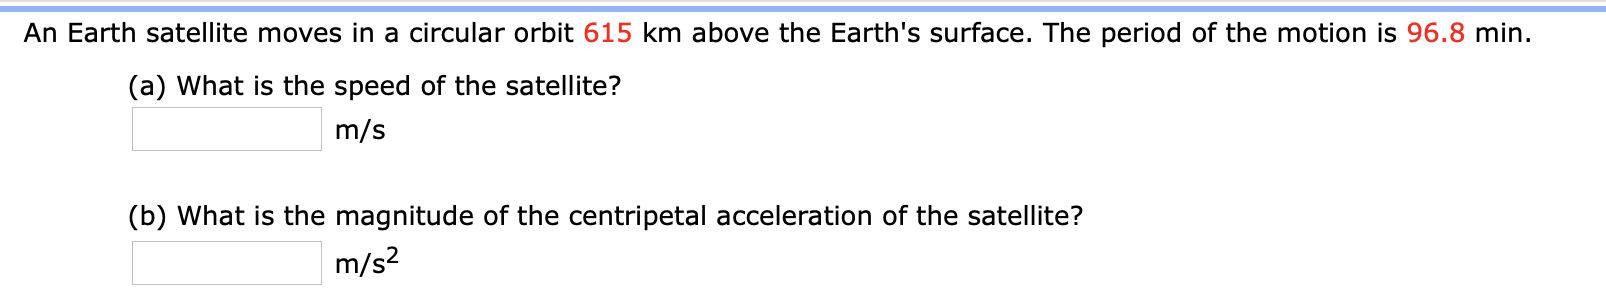 An Earth satellite moves in a circular orbit 615 km above the Earth's surface. The period of the motion is 96.8 min.
(a) What is the speed of the satellite?
m/s
(b) What is the magnitude of the centripetal acceleration of the satellite?
m/s?
